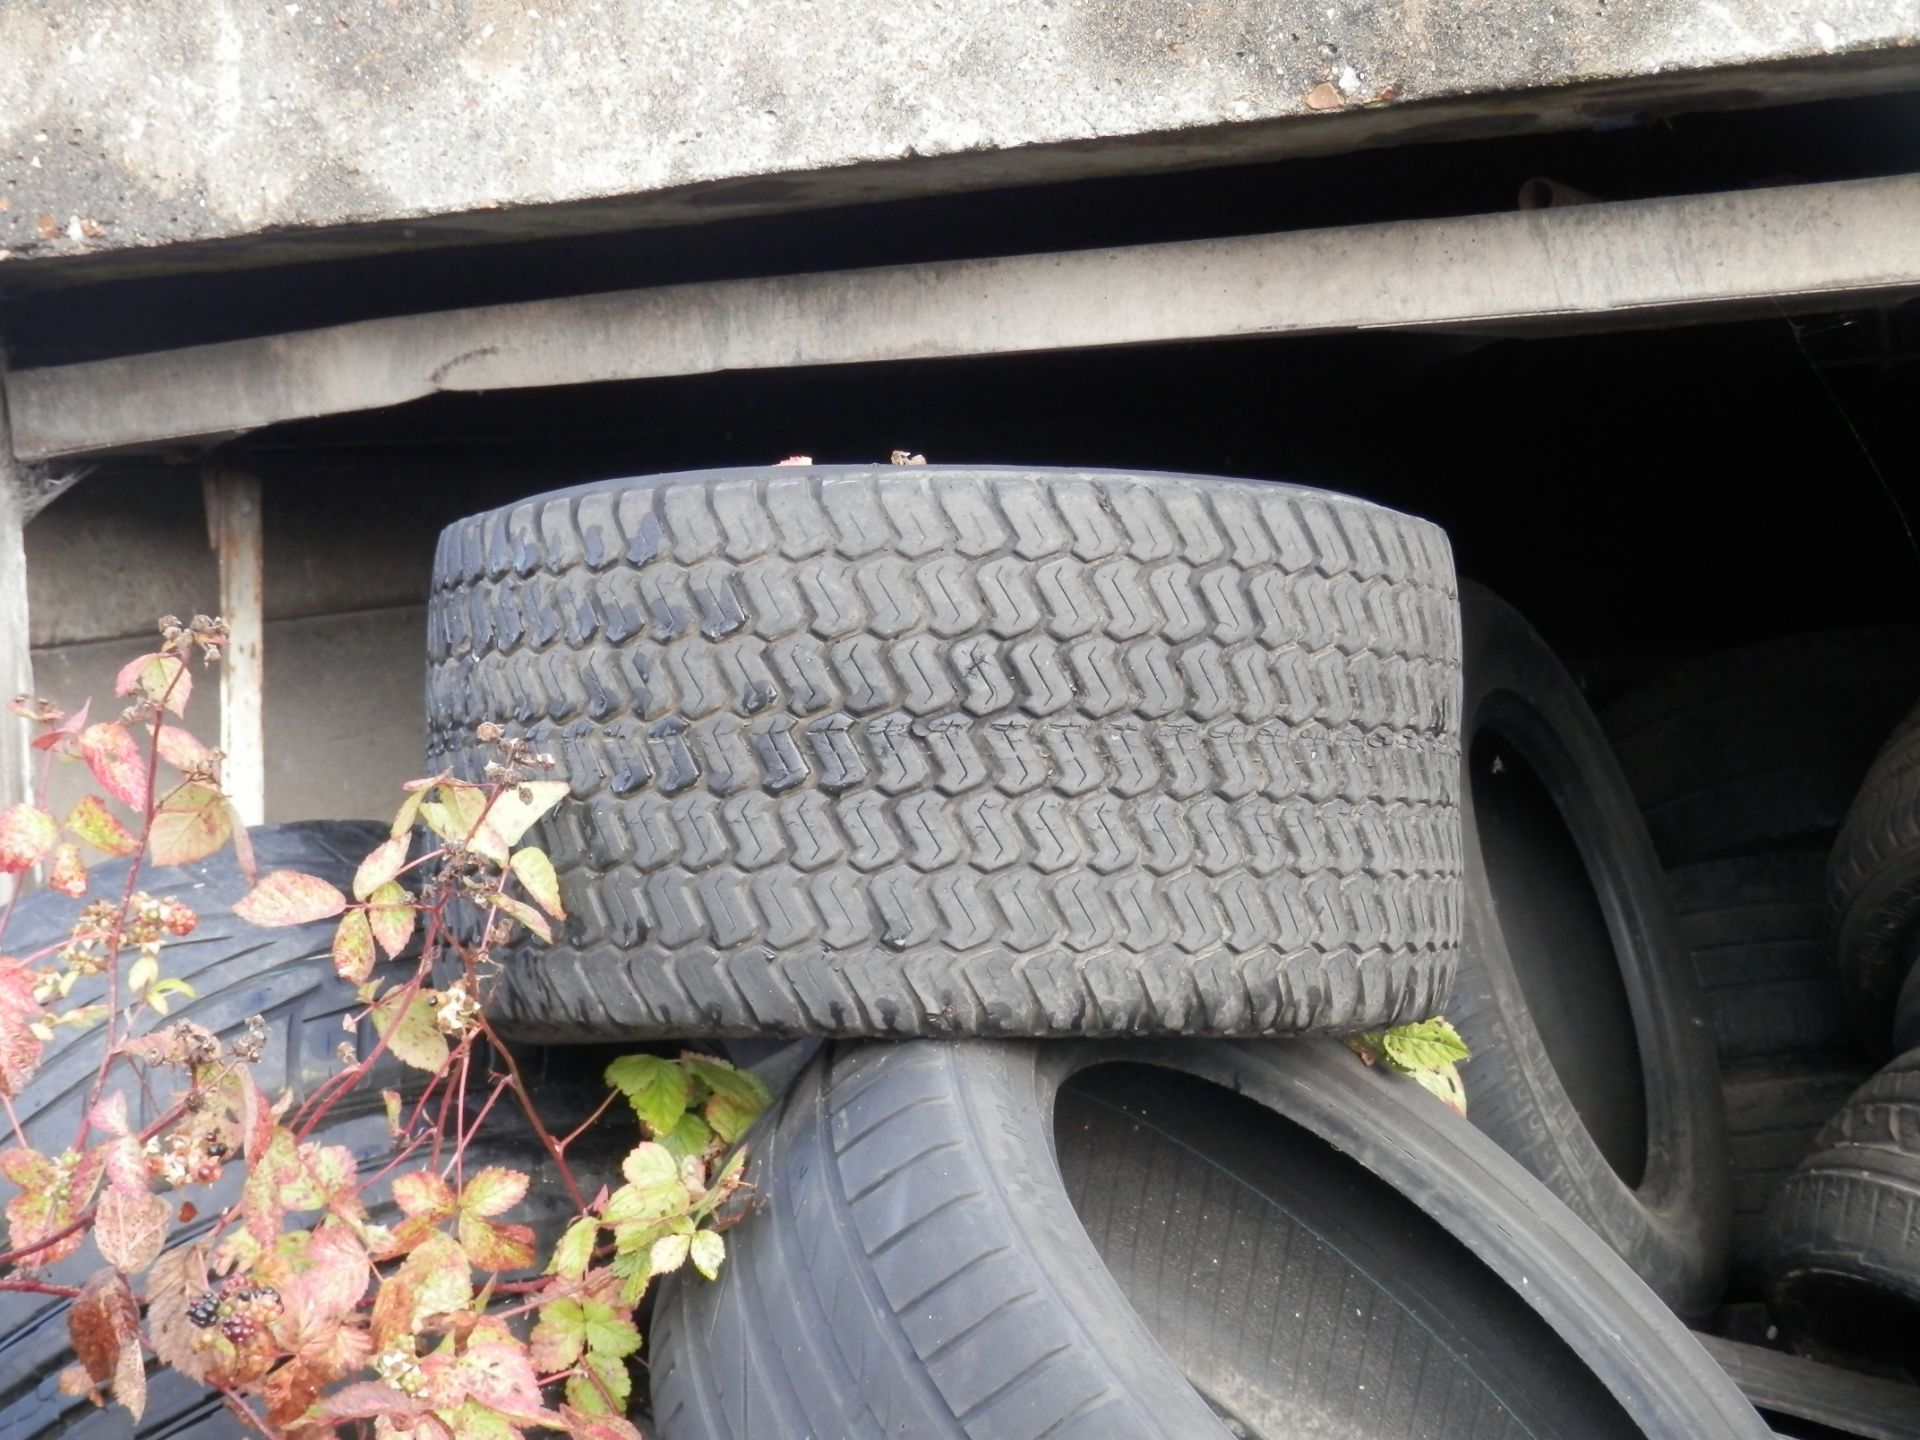 3 GARAGES FULL OF USED, PART WORN TYRES. ASSORTED FROM CAR TO LORRY TYRES. POSSIBLY 800+ - Image 7 of 8